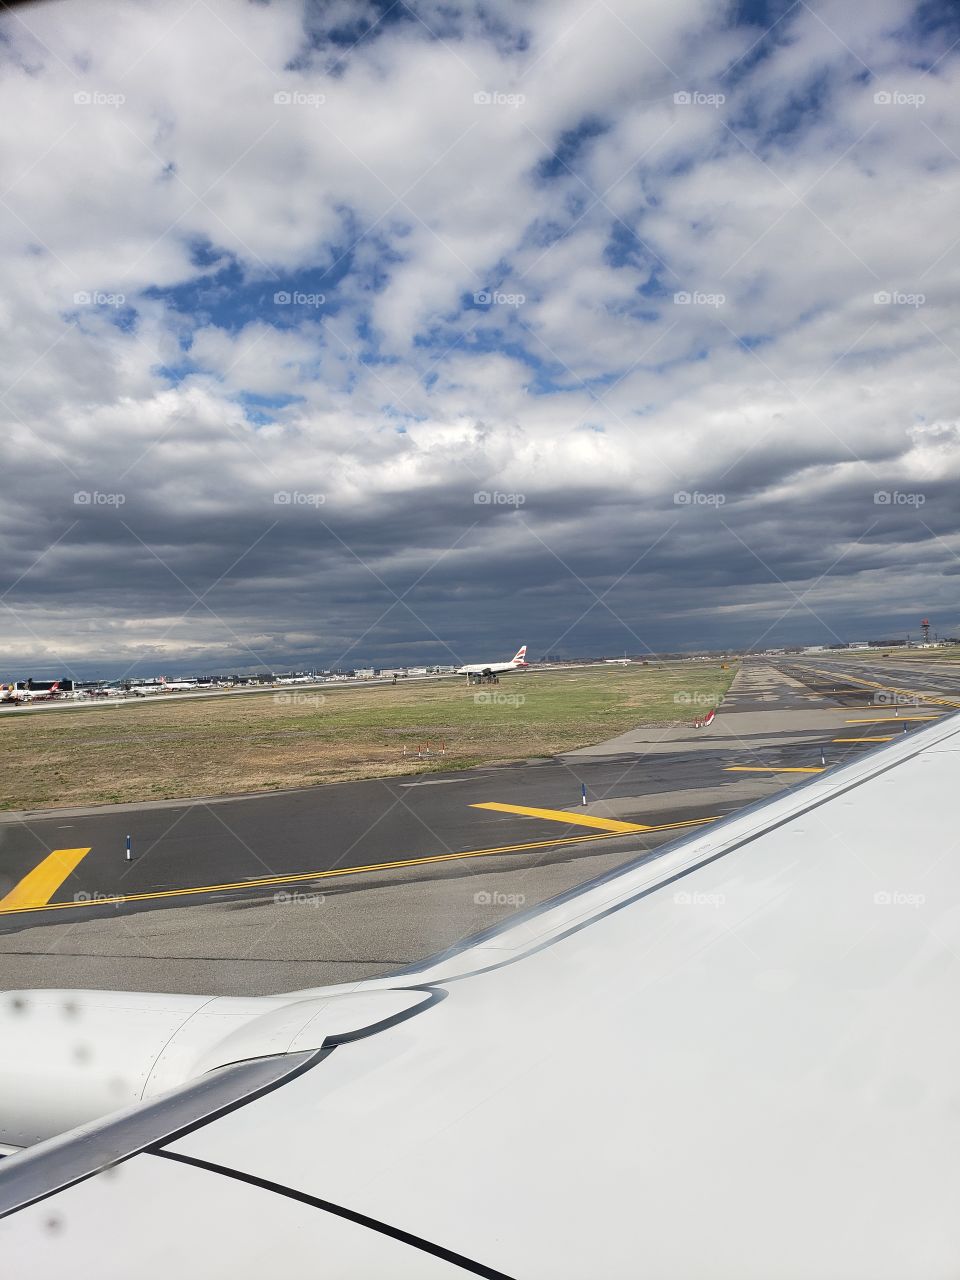 Just Landing in New York, USA, April 2019